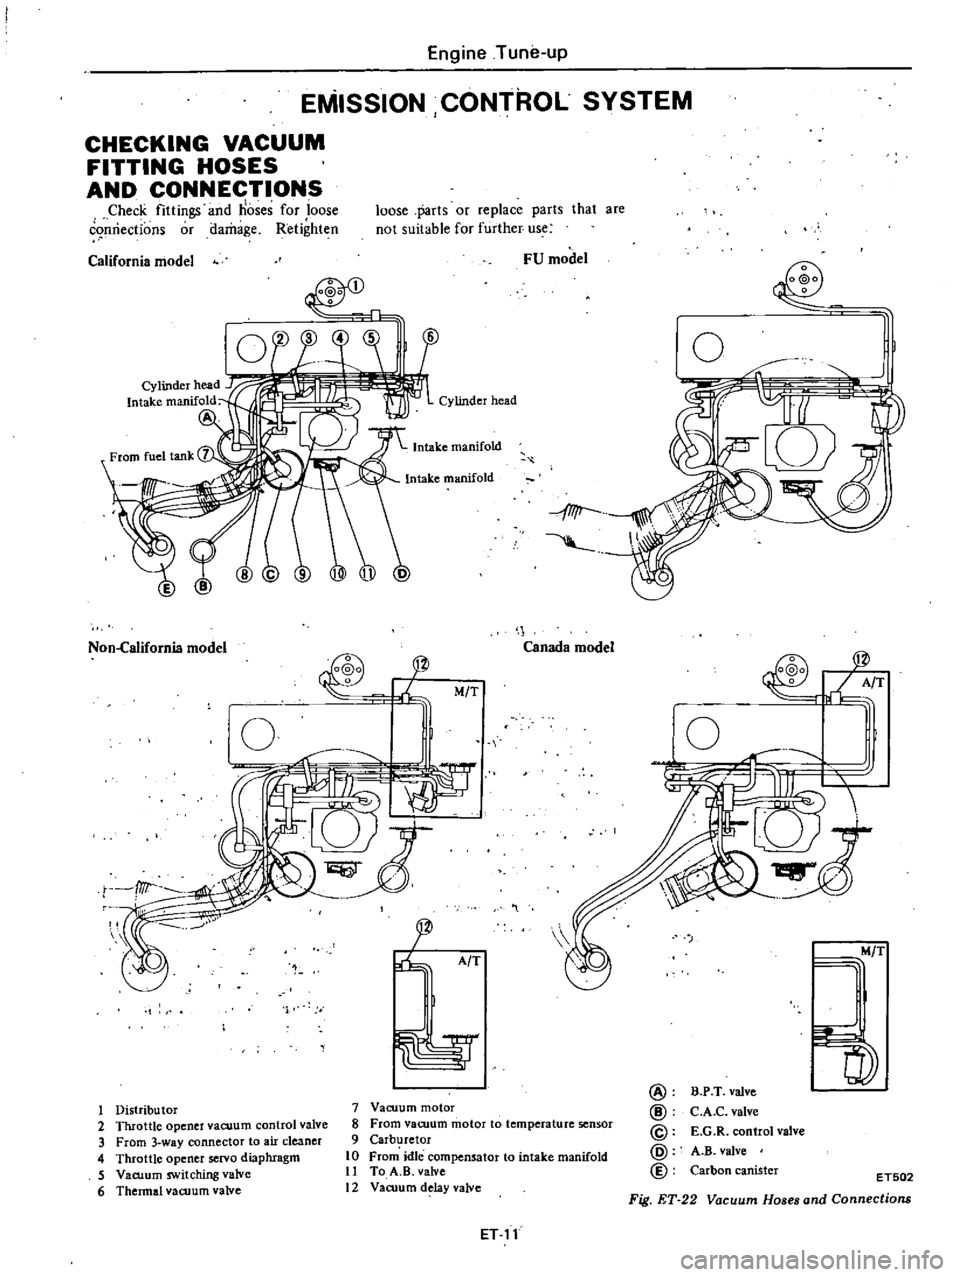 DATSUN 210 1979  Service Manual 
Engine 
Tune

up

EMISSION 
CONTROL 
SYSTEM

CHECKING 
VACUUM

FITTING 
HOSES

AND 
CONNECTIONS

Check

fittings 
and 
hoses 
for

ioose

cqnriections 
or

damage 
Retighten 
loose

parts 
or

replac